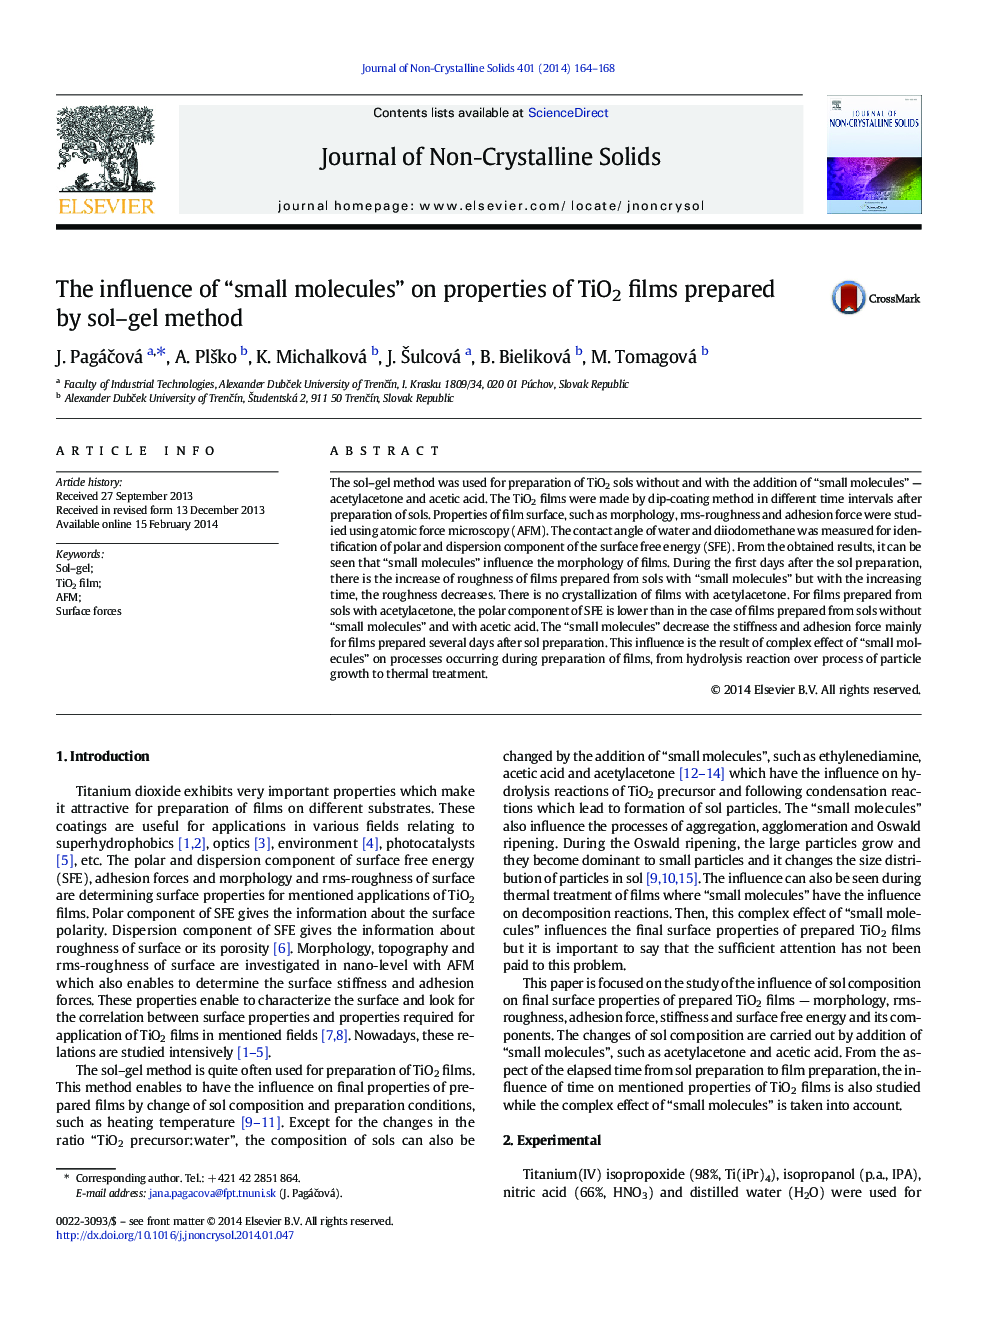 The influence of “small molecules” on properties of TiO2 films prepared by sol–gel method